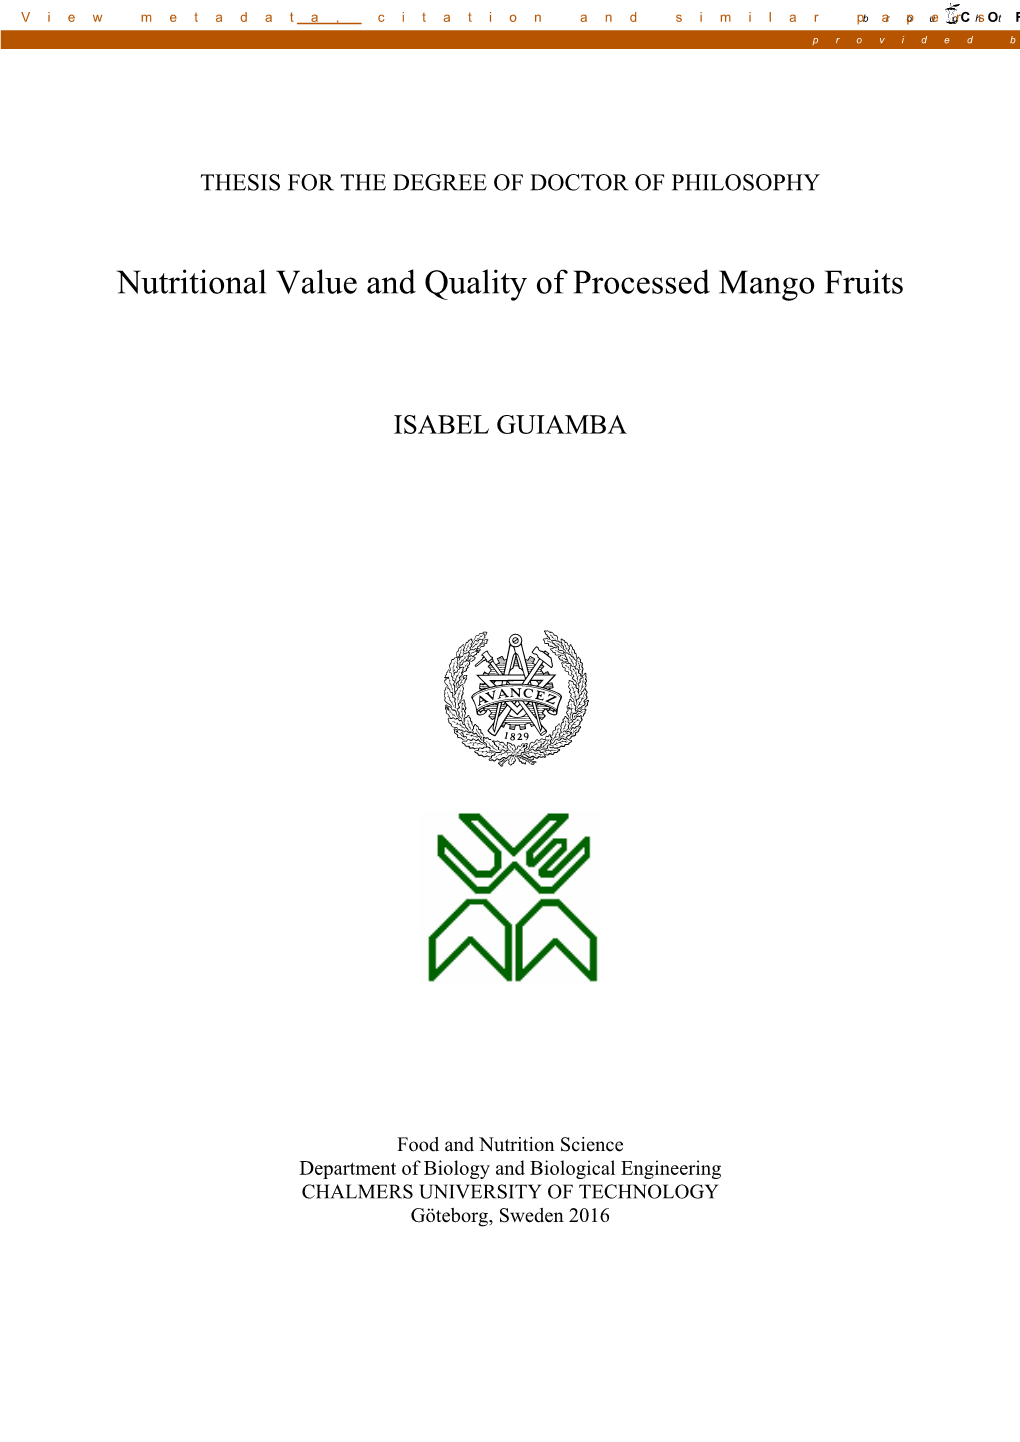 Nutritional Value and Quality of Processed Mango Fruits